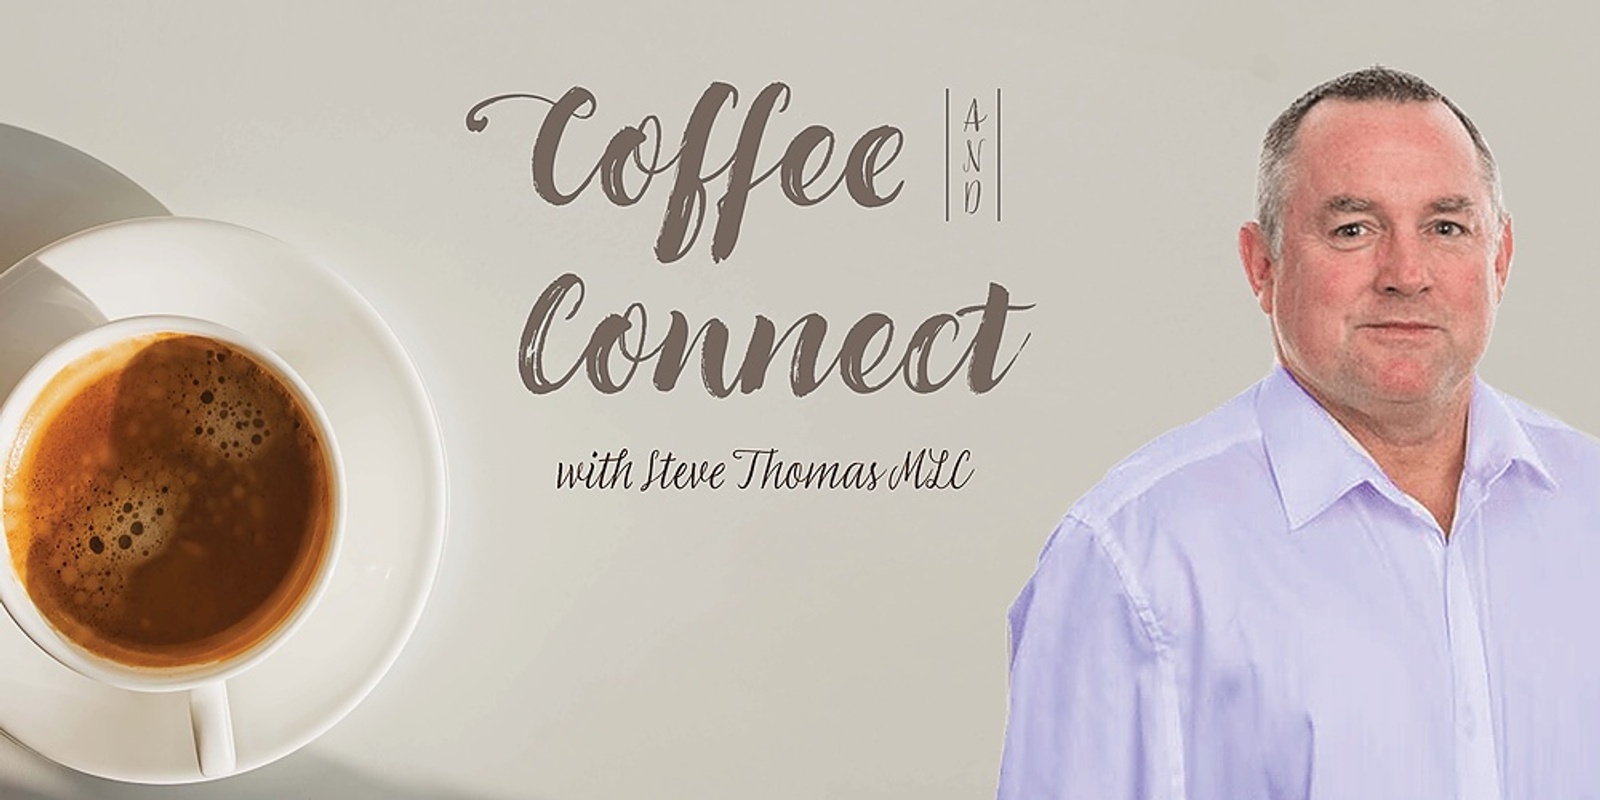 Coffee and Connect with Steve Thomas MLC